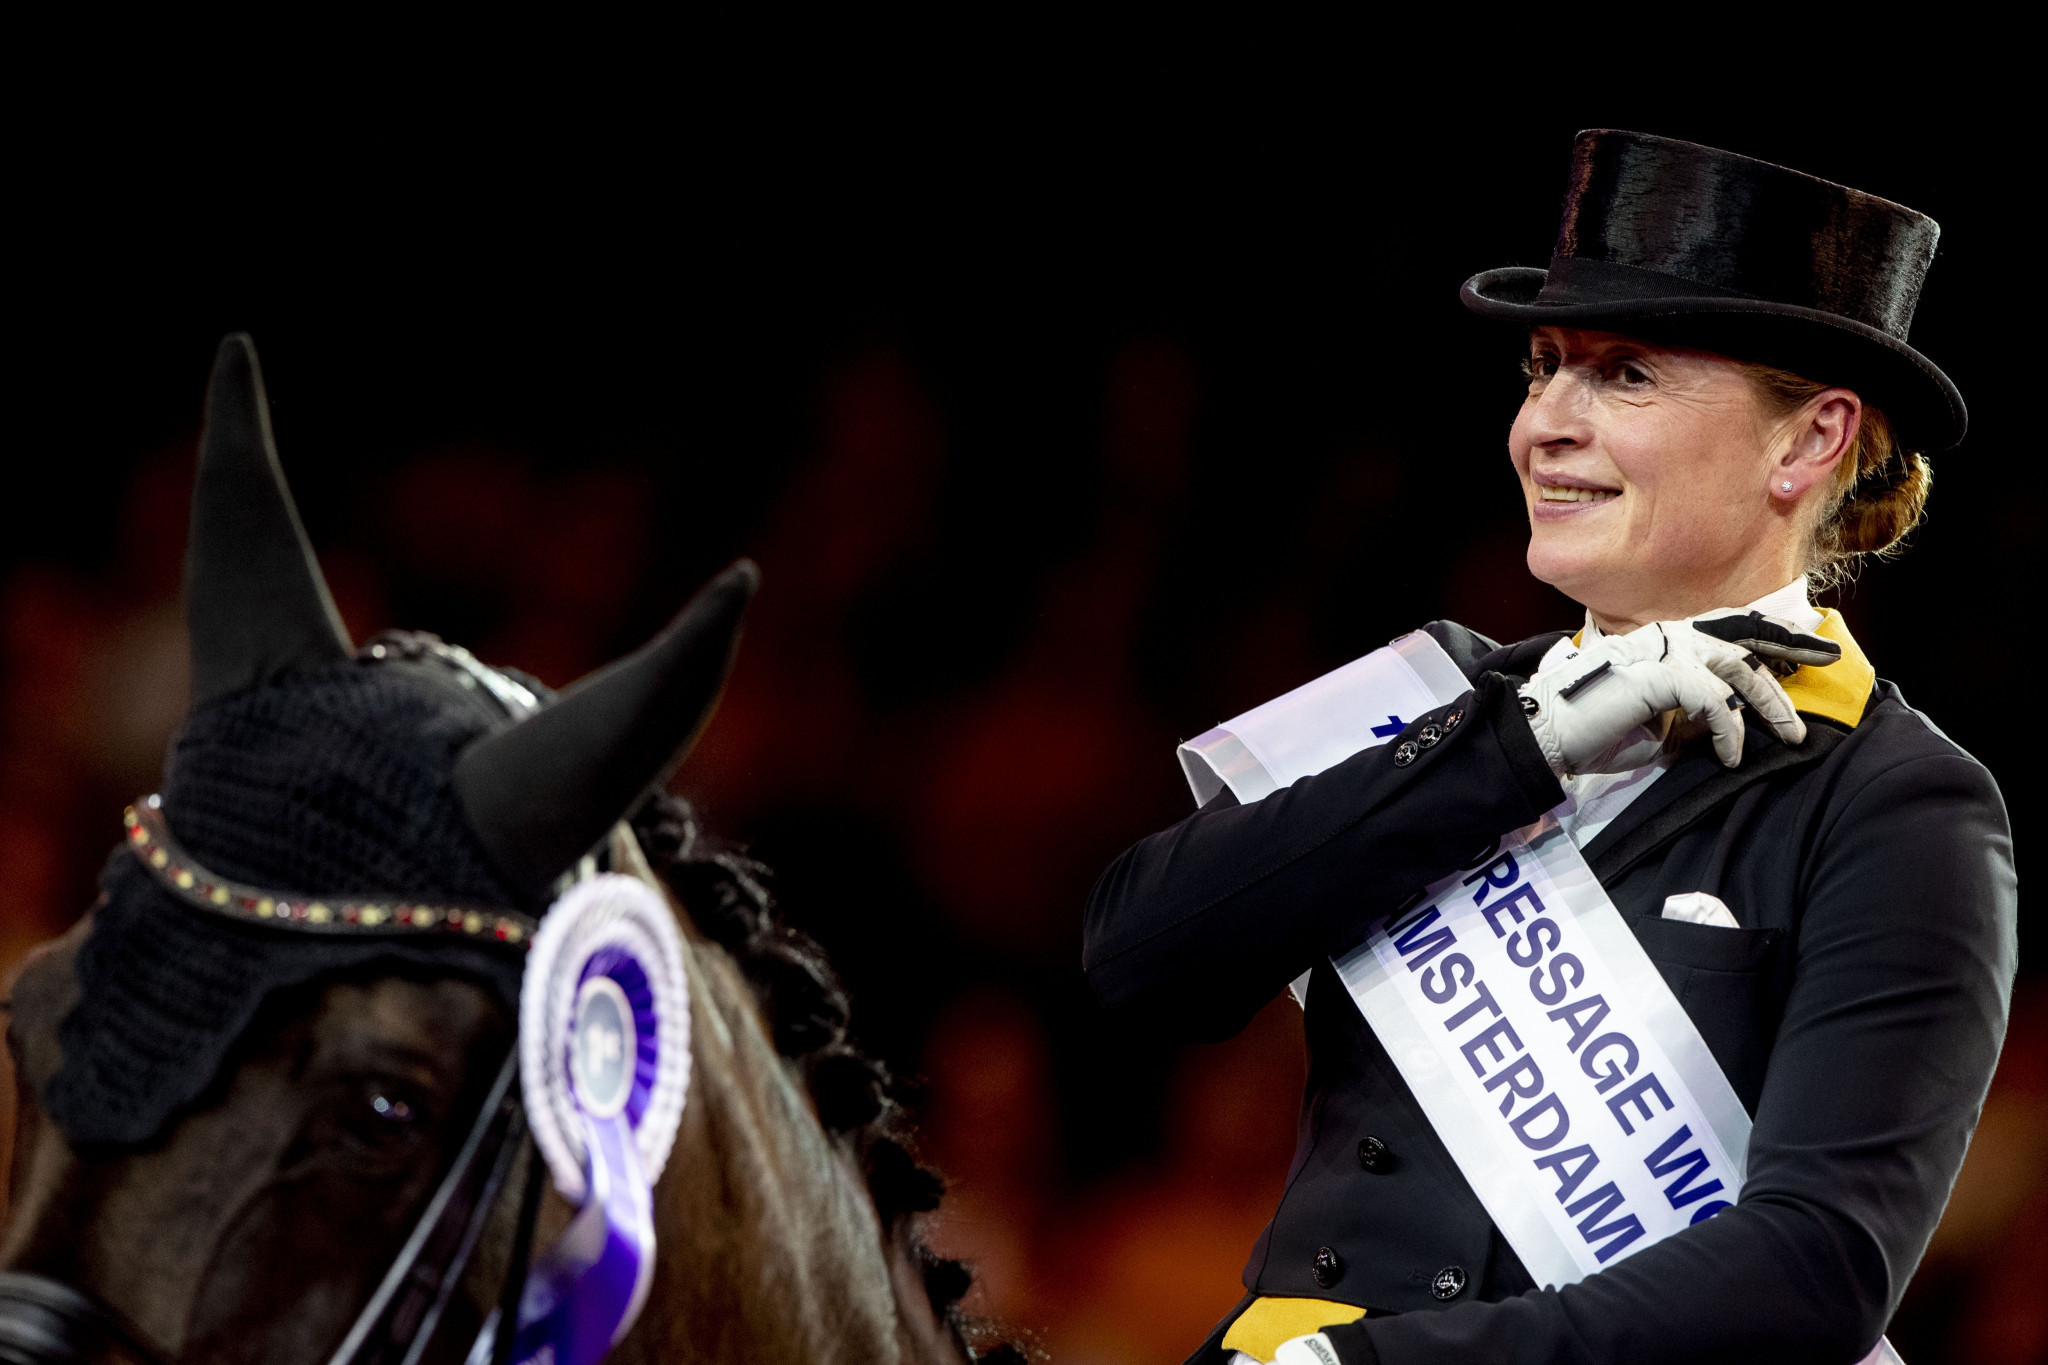 German riders dominate podium at FEI Dressage World Cup in Amsterdam